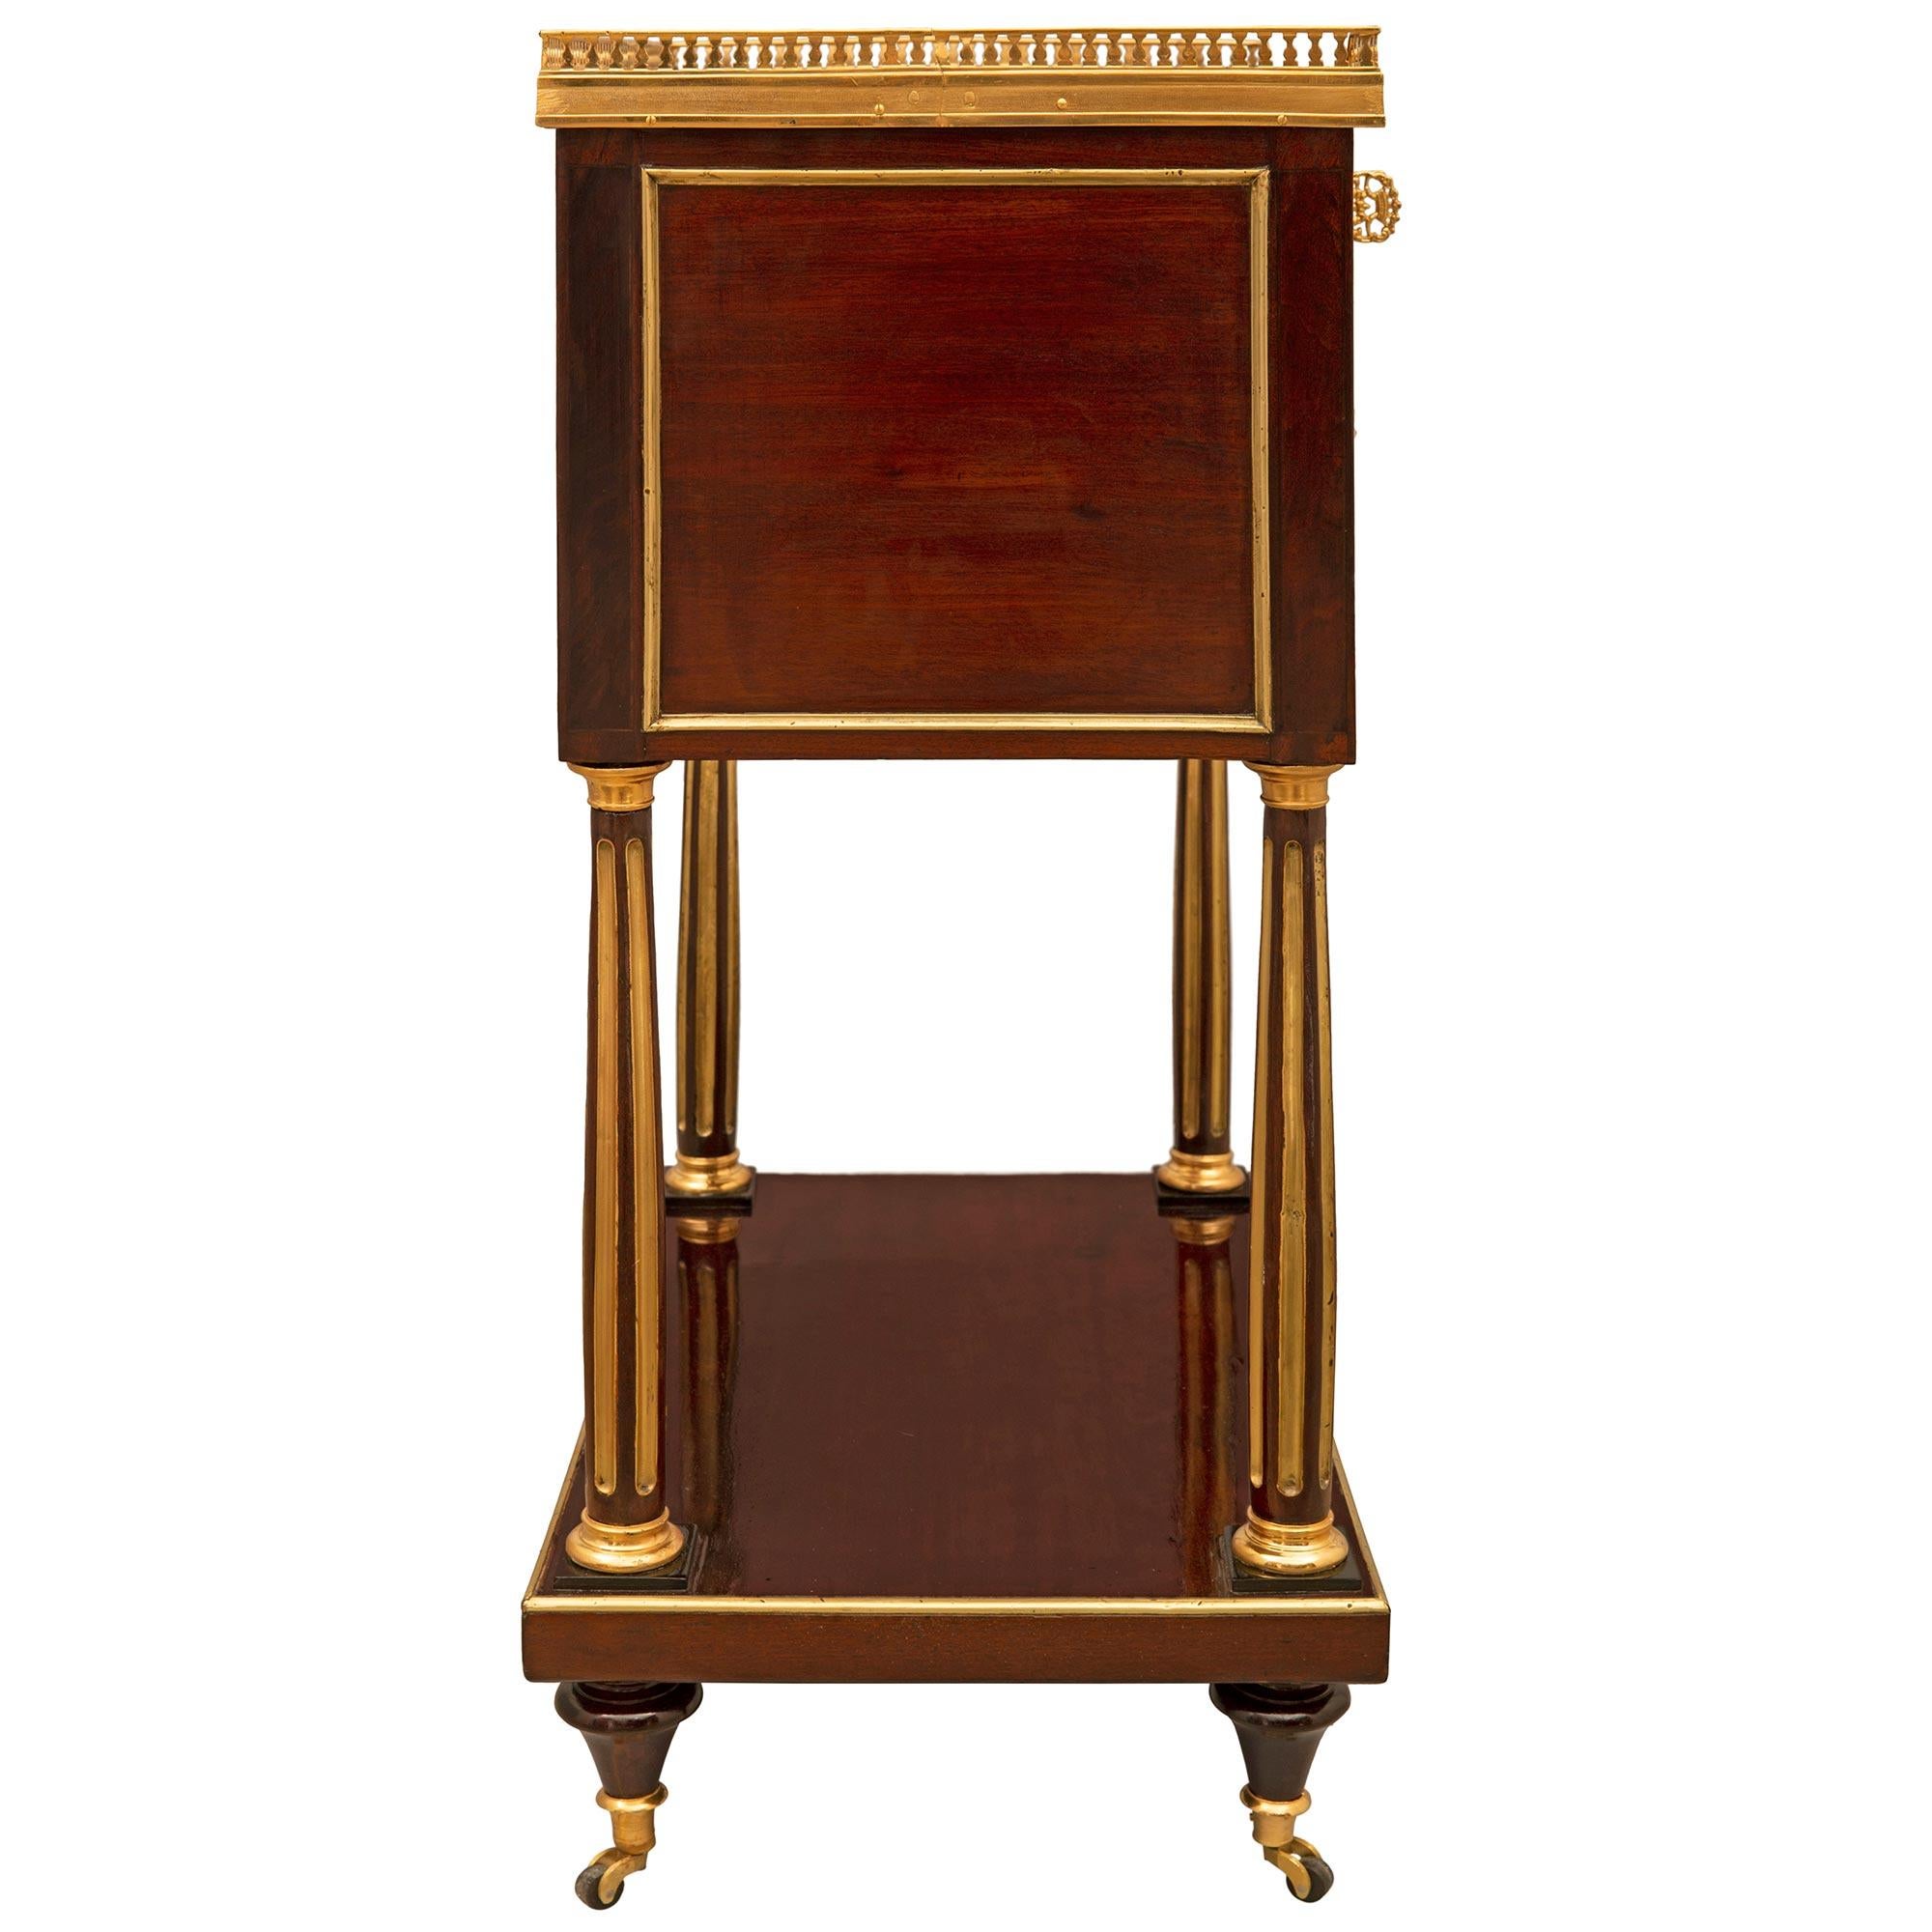 Mirror French 18th Century Louis XVI Period Mahogany and Ormolu Vanity/Side Table For Sale